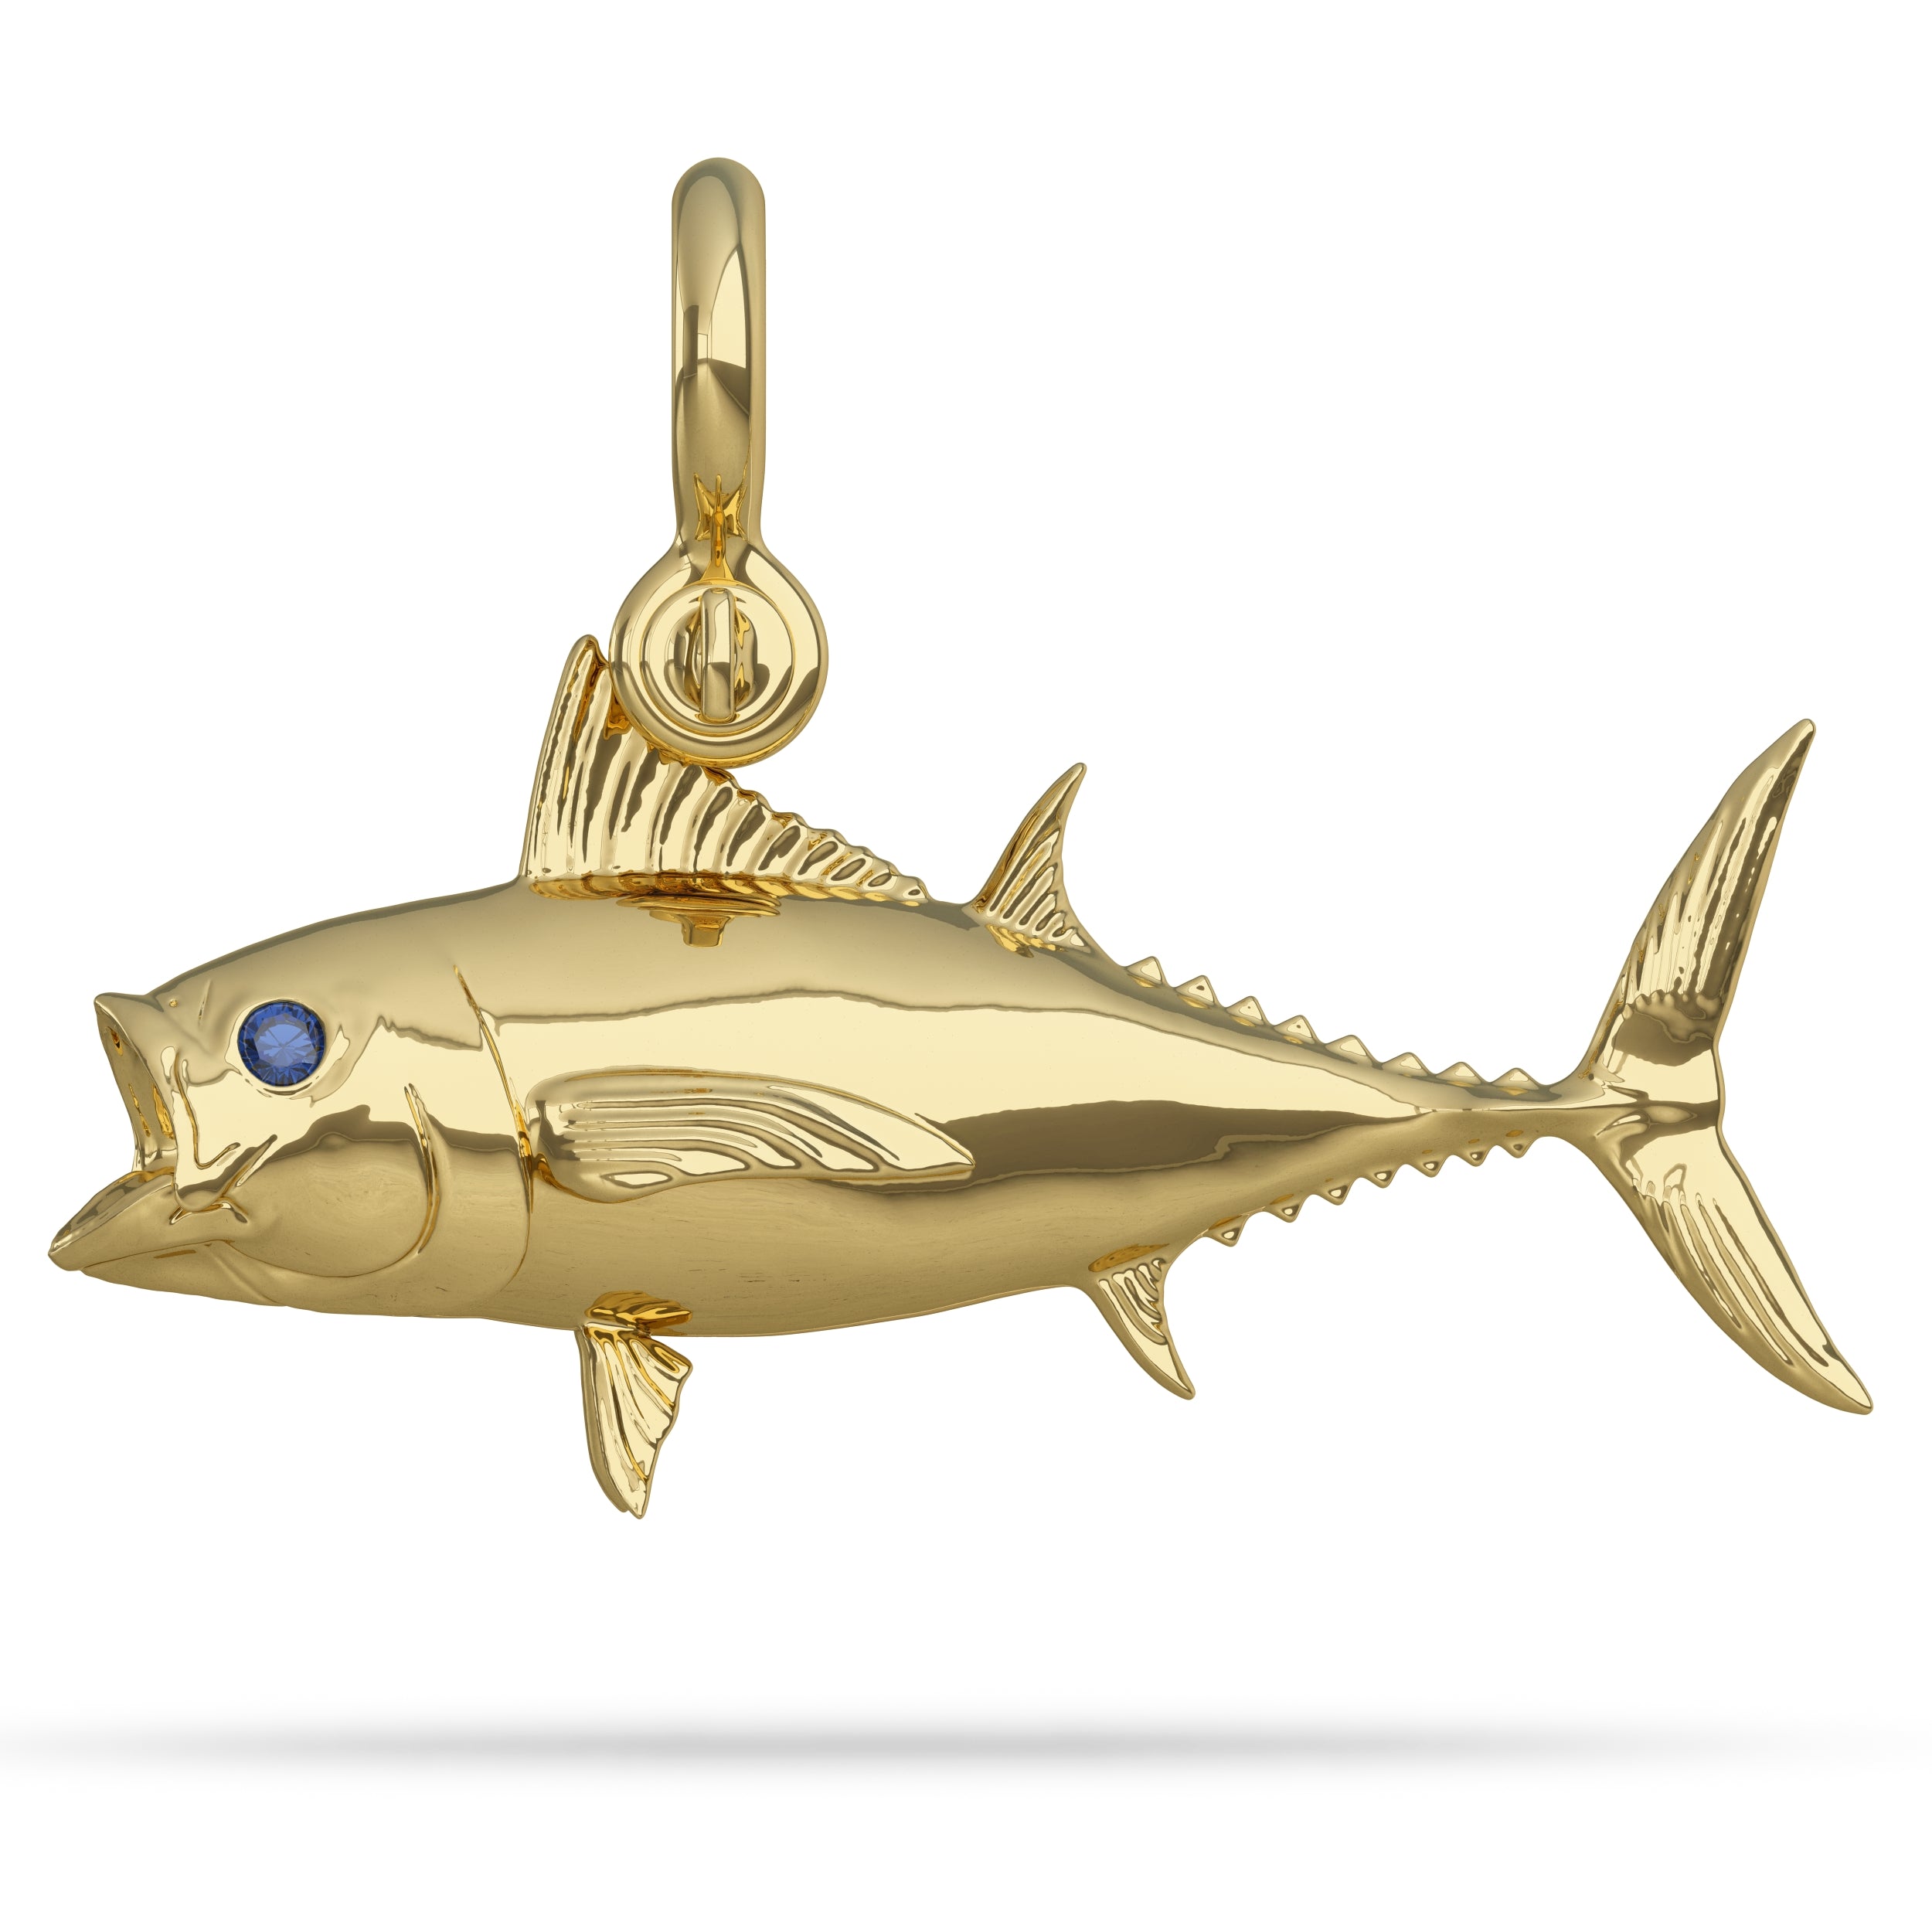 Solid 14k Gold Blackfin Tuna Pendant High Polished Mirror Finish With Blue Sapphire Eye with A Mariner Shackle Bail Custom Designed By Nautical Treasure Jewelry In The Florida Keys Caught on Bubbler C & H Lures